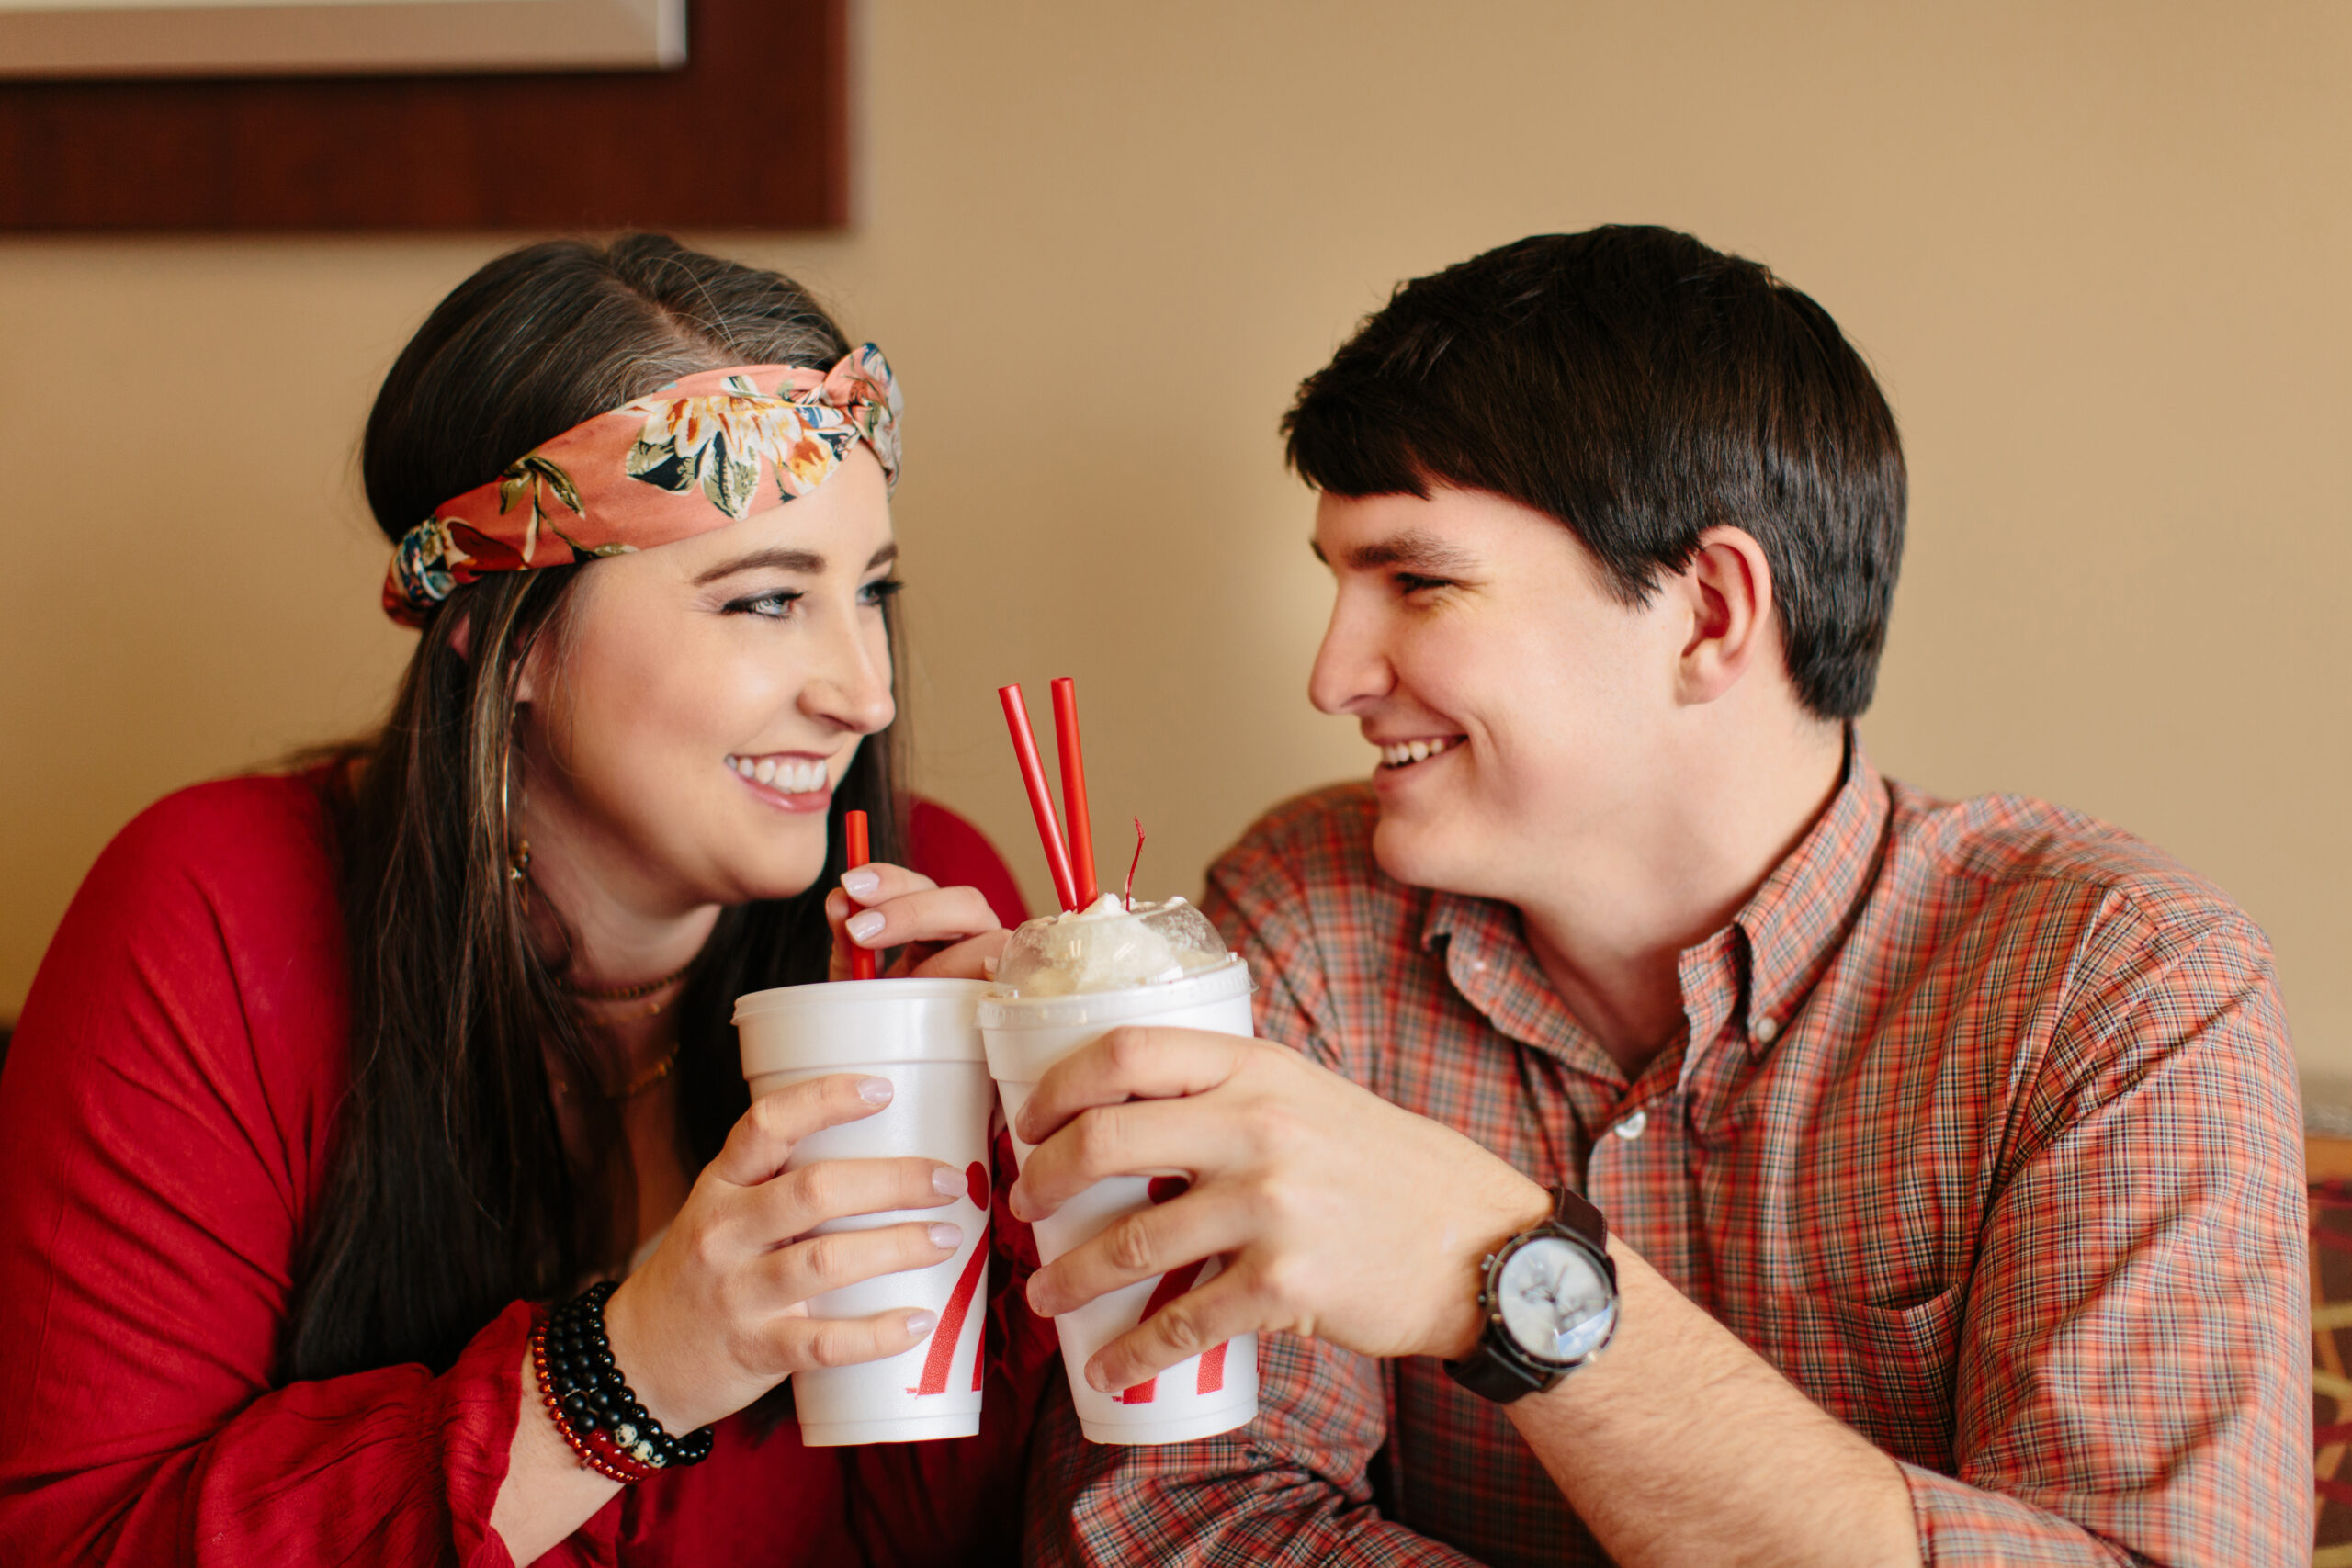 Chick-Fil-A Engagement Session | Two Chics Photography | www.twochicsphotography.com